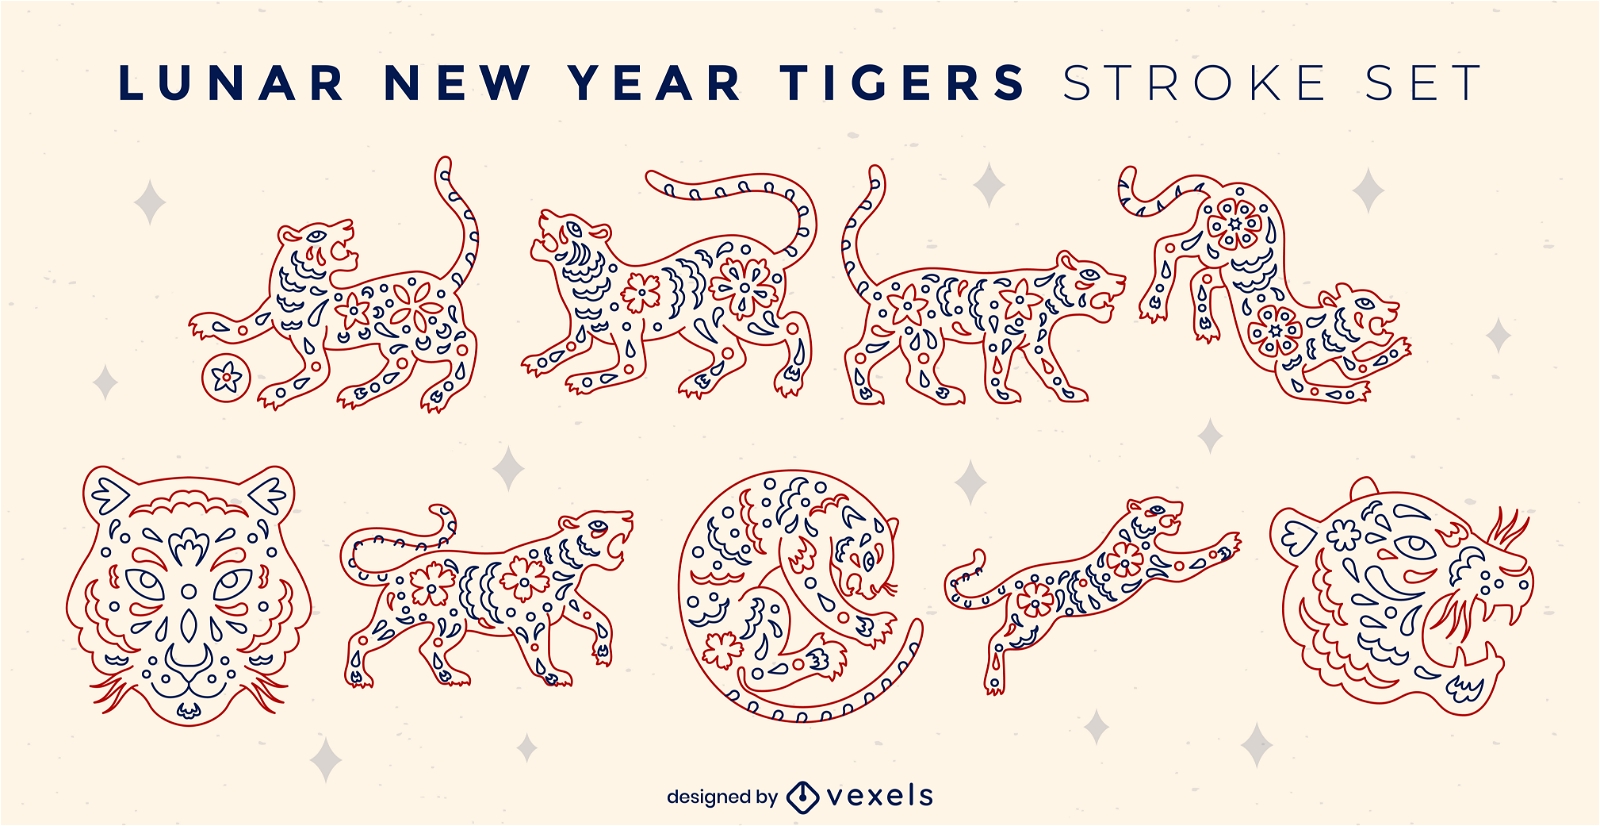 Lunar new year tigers stroke character set